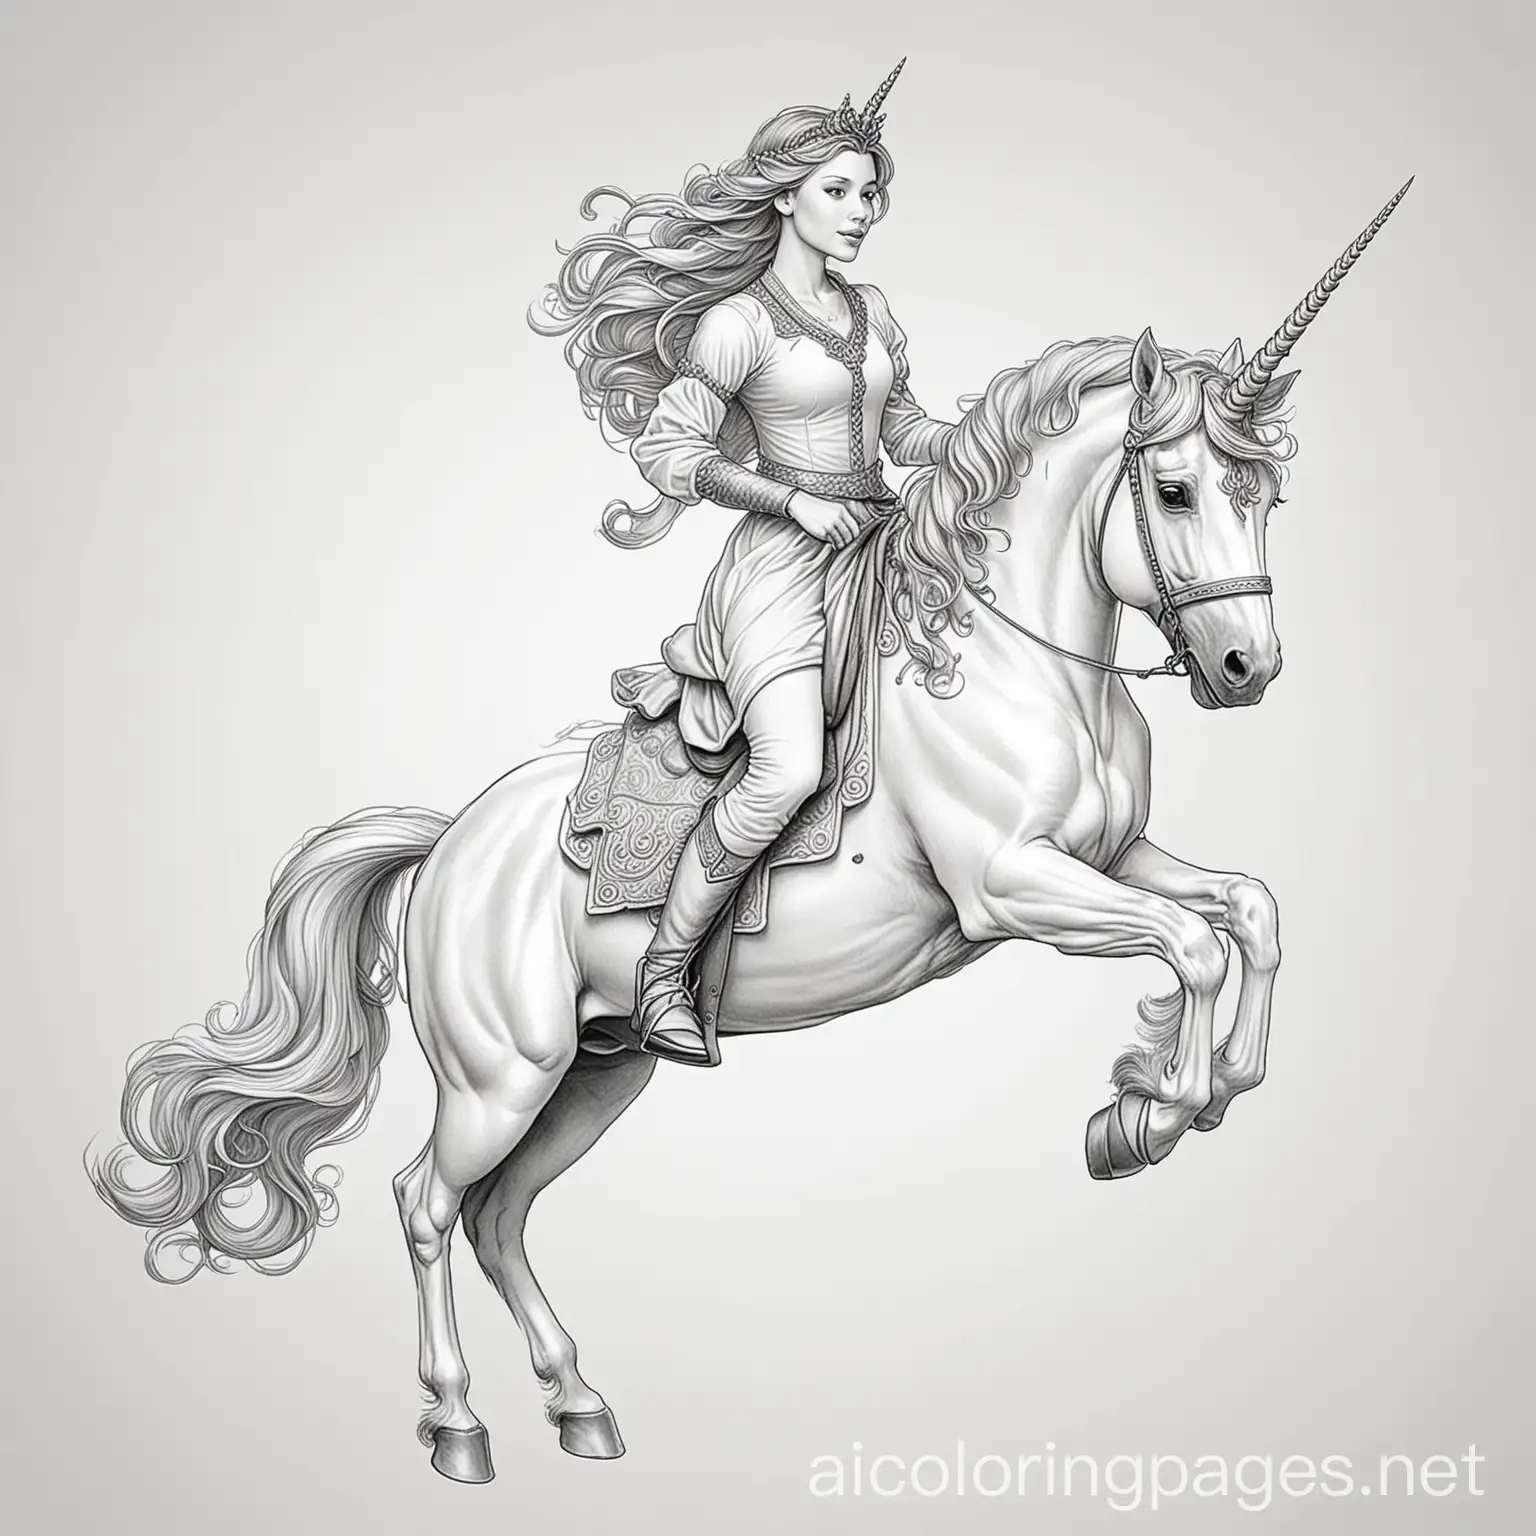 Princess riding majestic unicorn, Coloring Page, black and white, line art, white background, Simplicity, Ample White Space. The background of the coloring page is plain white to make it easy for young children to color within the lines. The outlines of all the subjects are easy to distinguish, making it simple for kids to color without too much difficulty